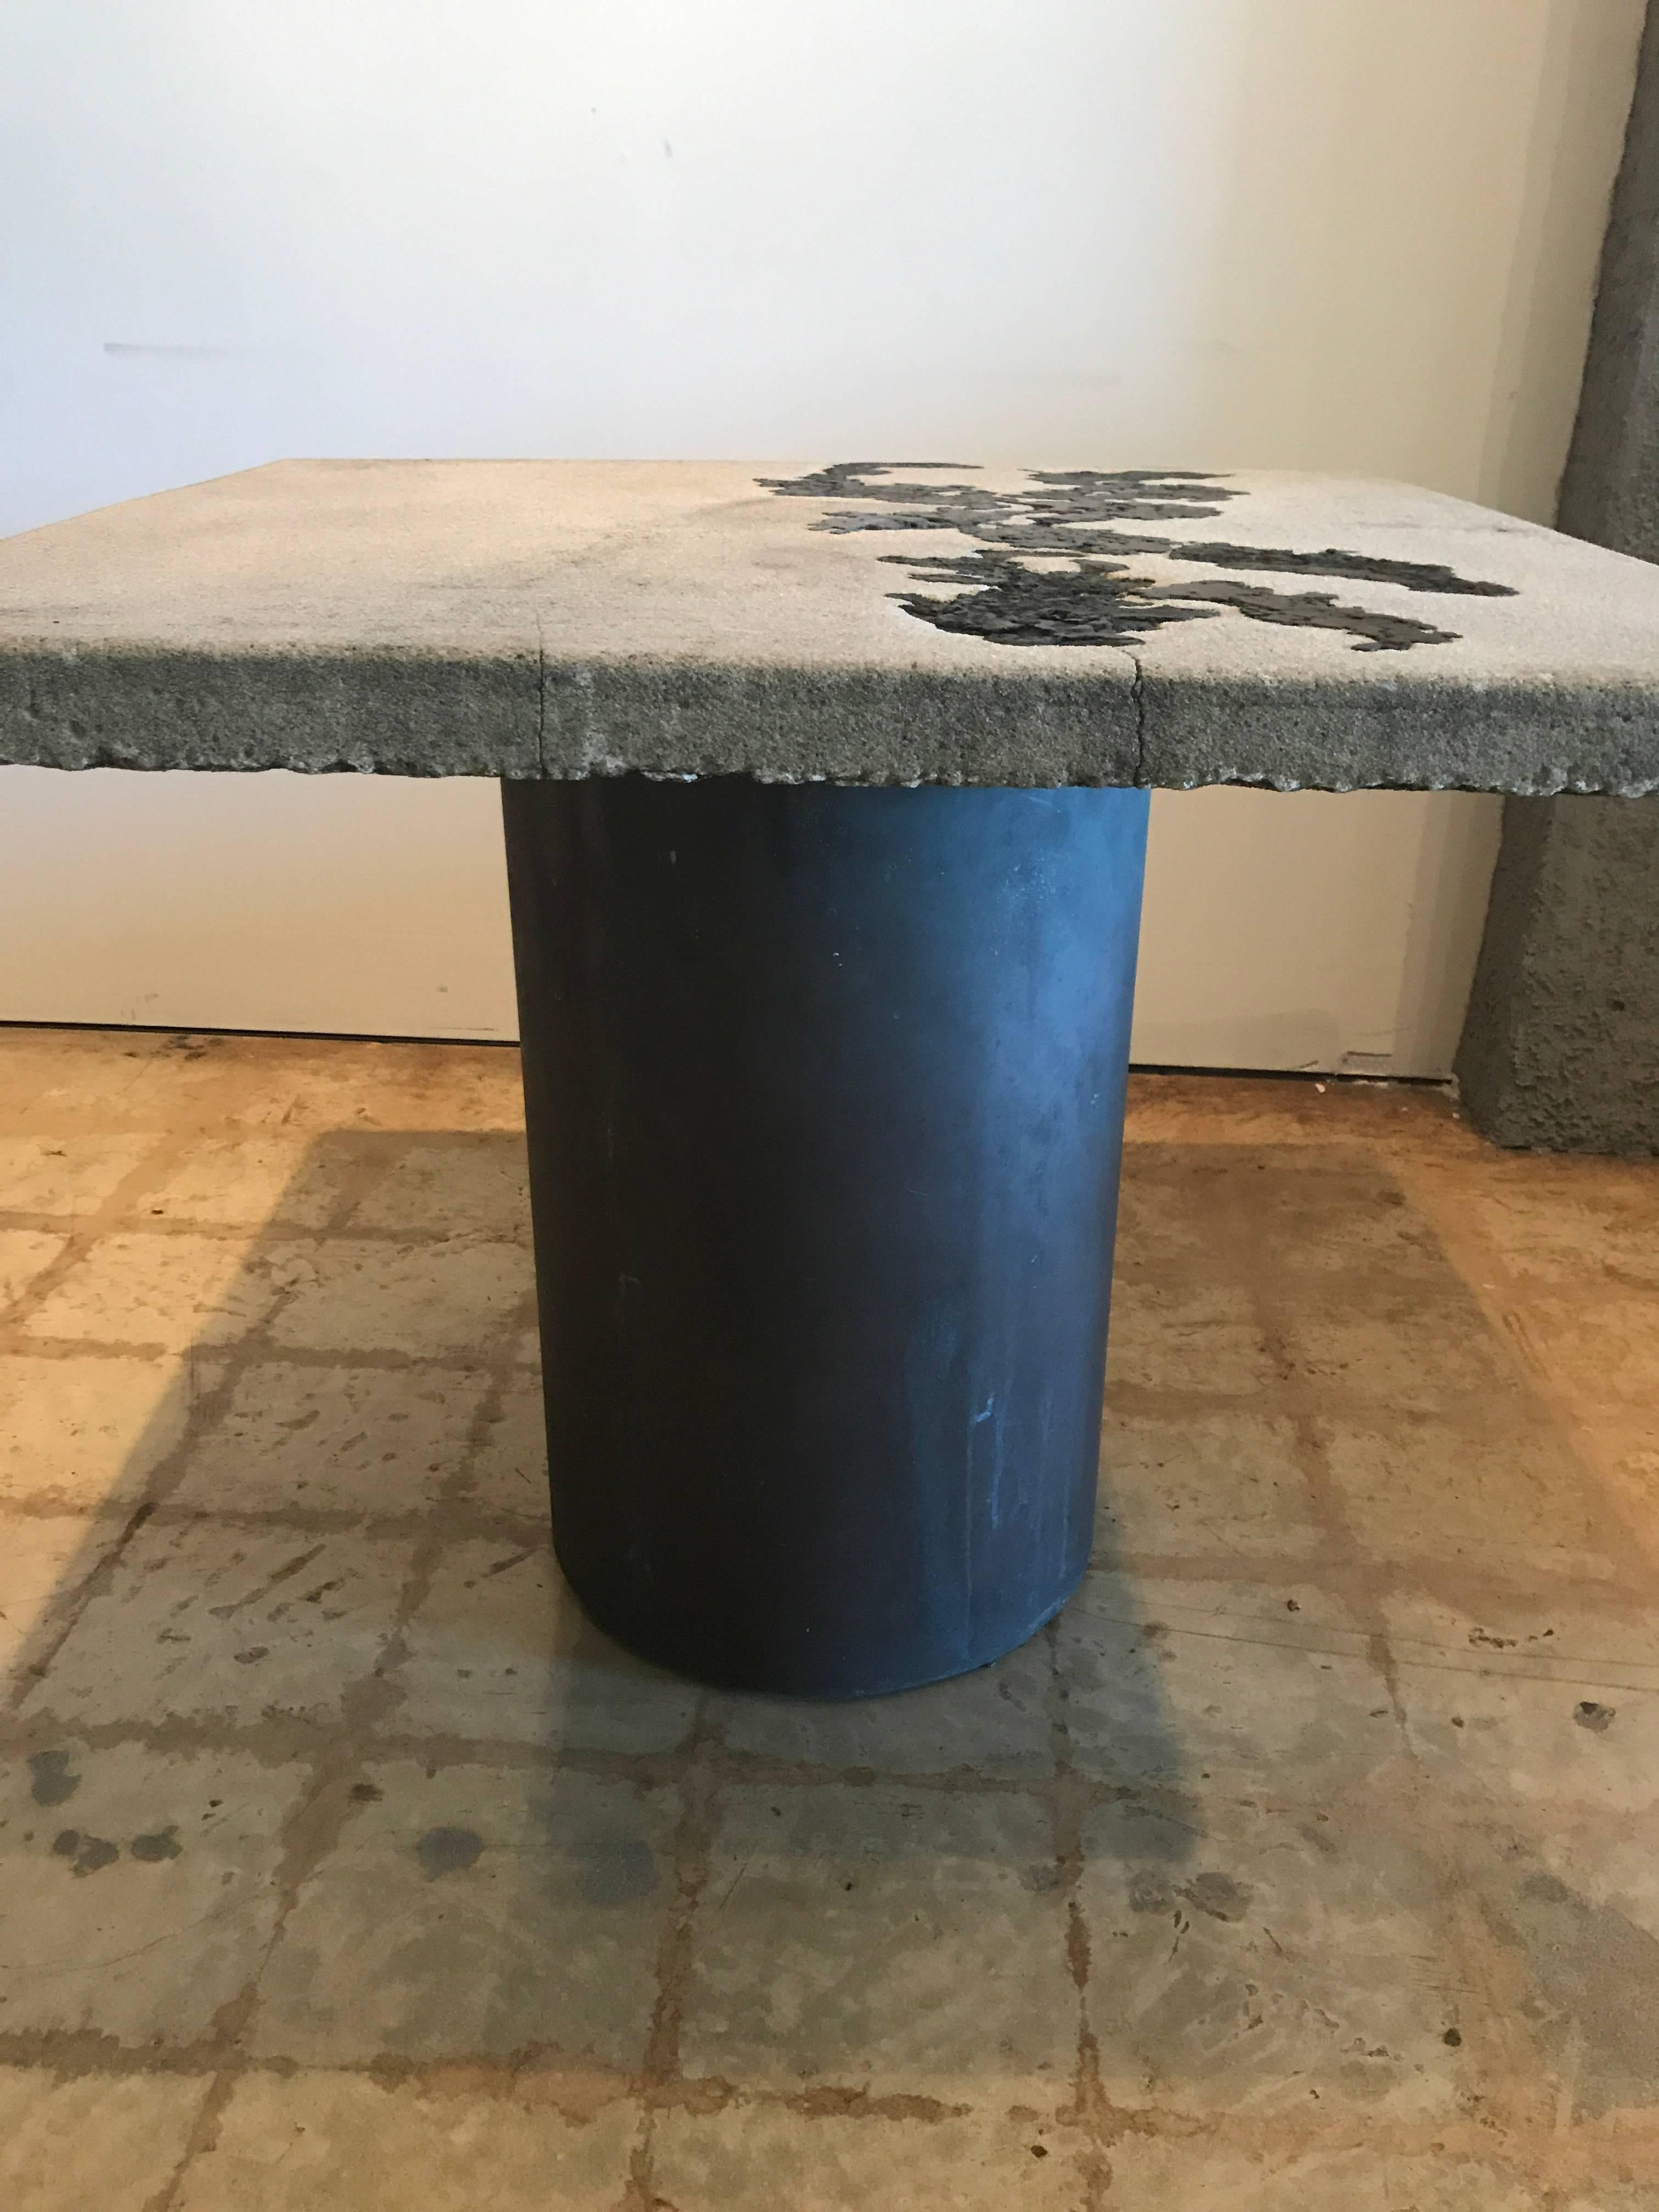 The concrete top inlaid with bronze abstract sections over a bronze cylinder base.